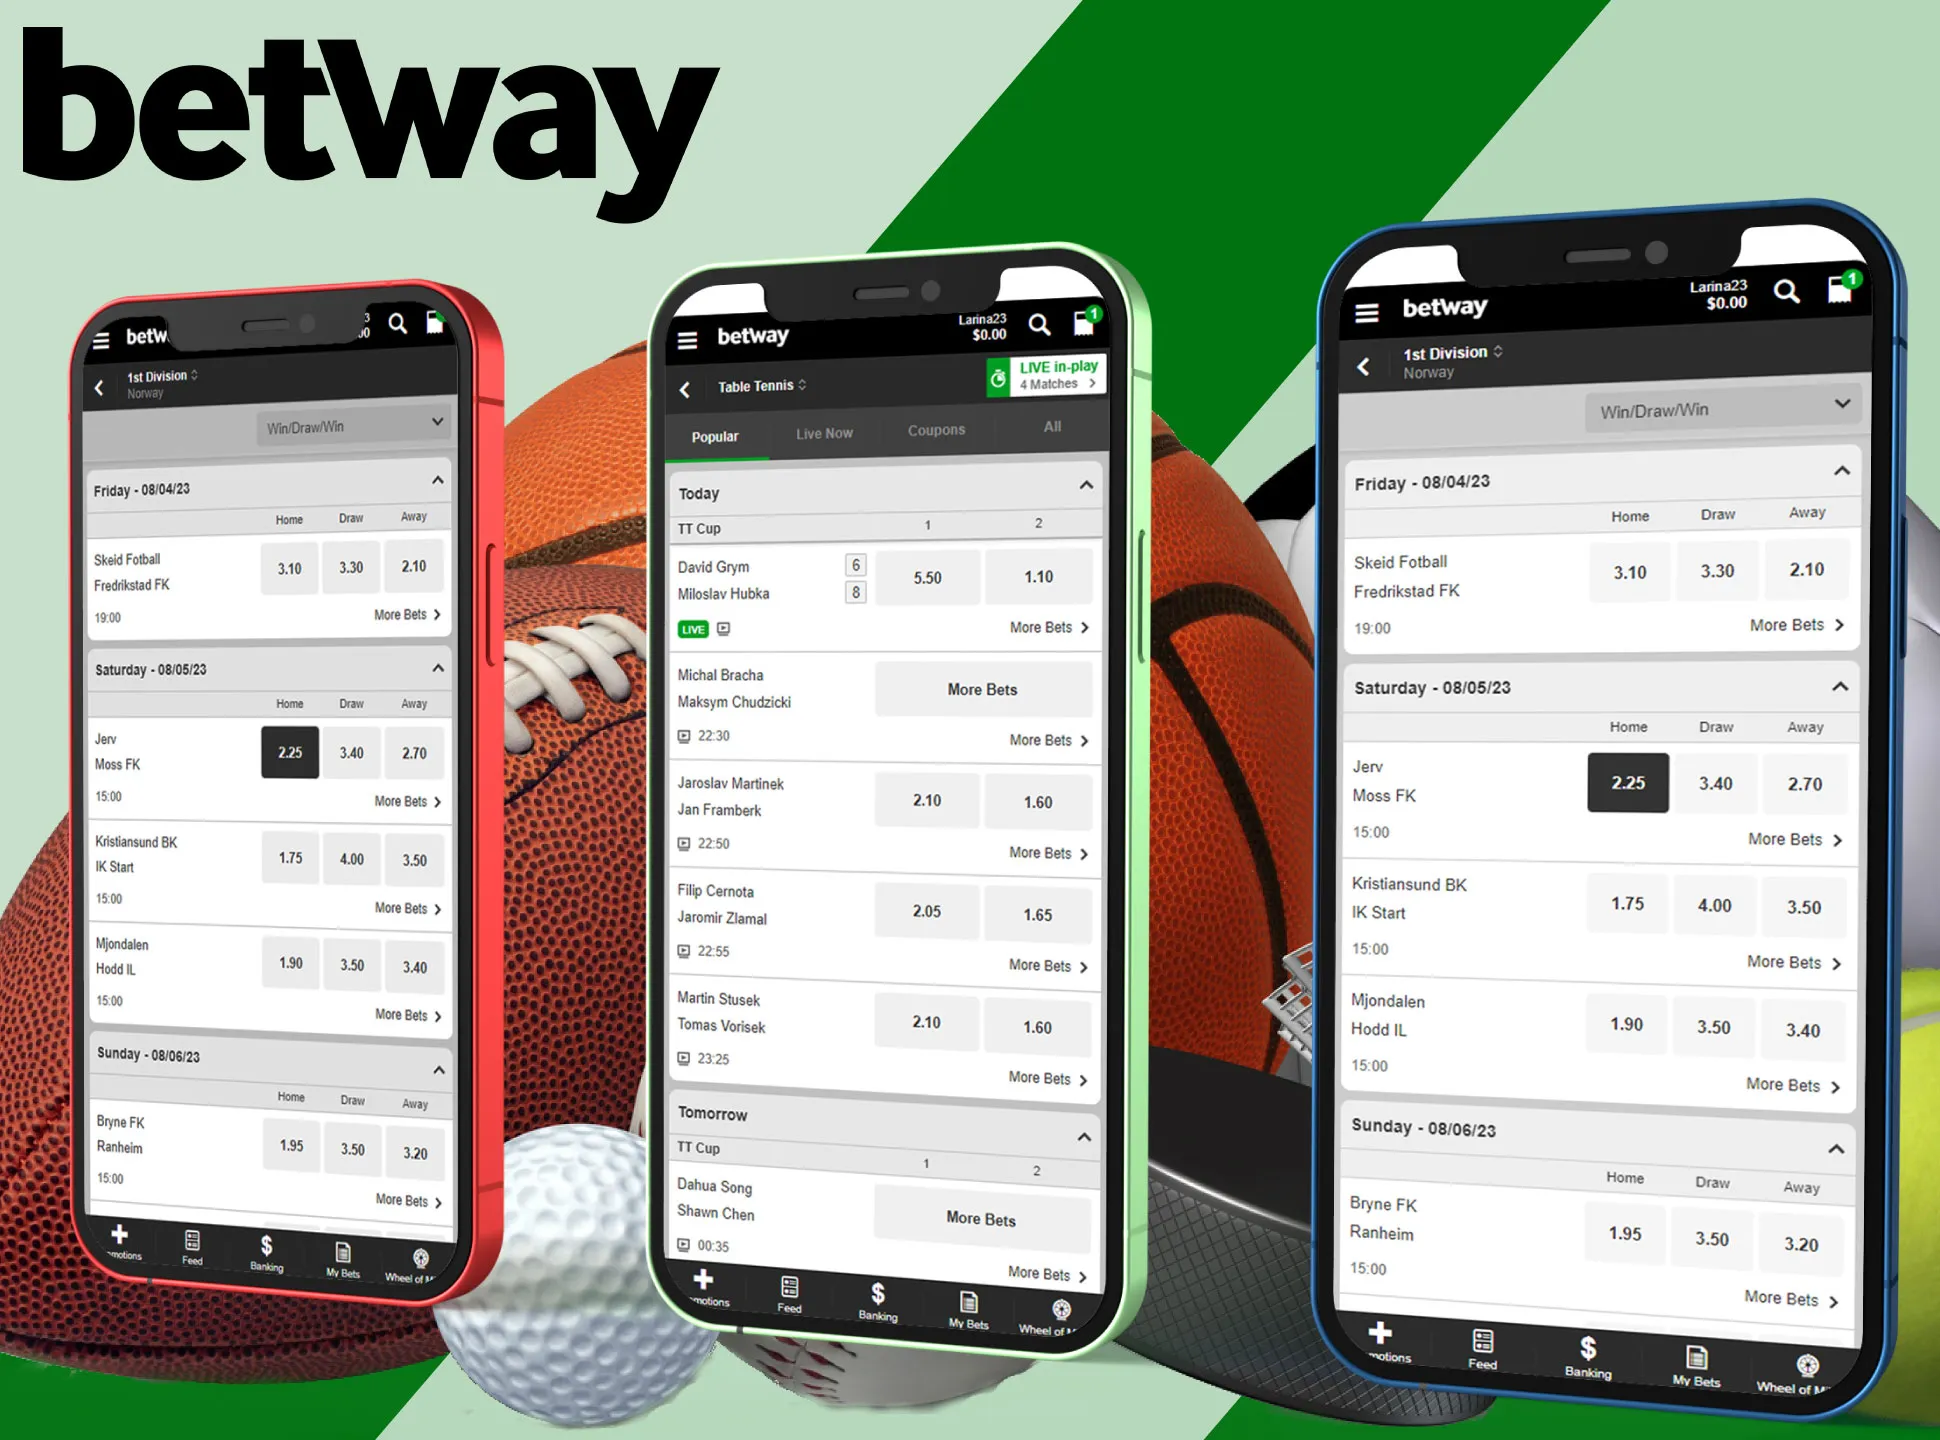 Betway offers different sports markets for betting via the app.